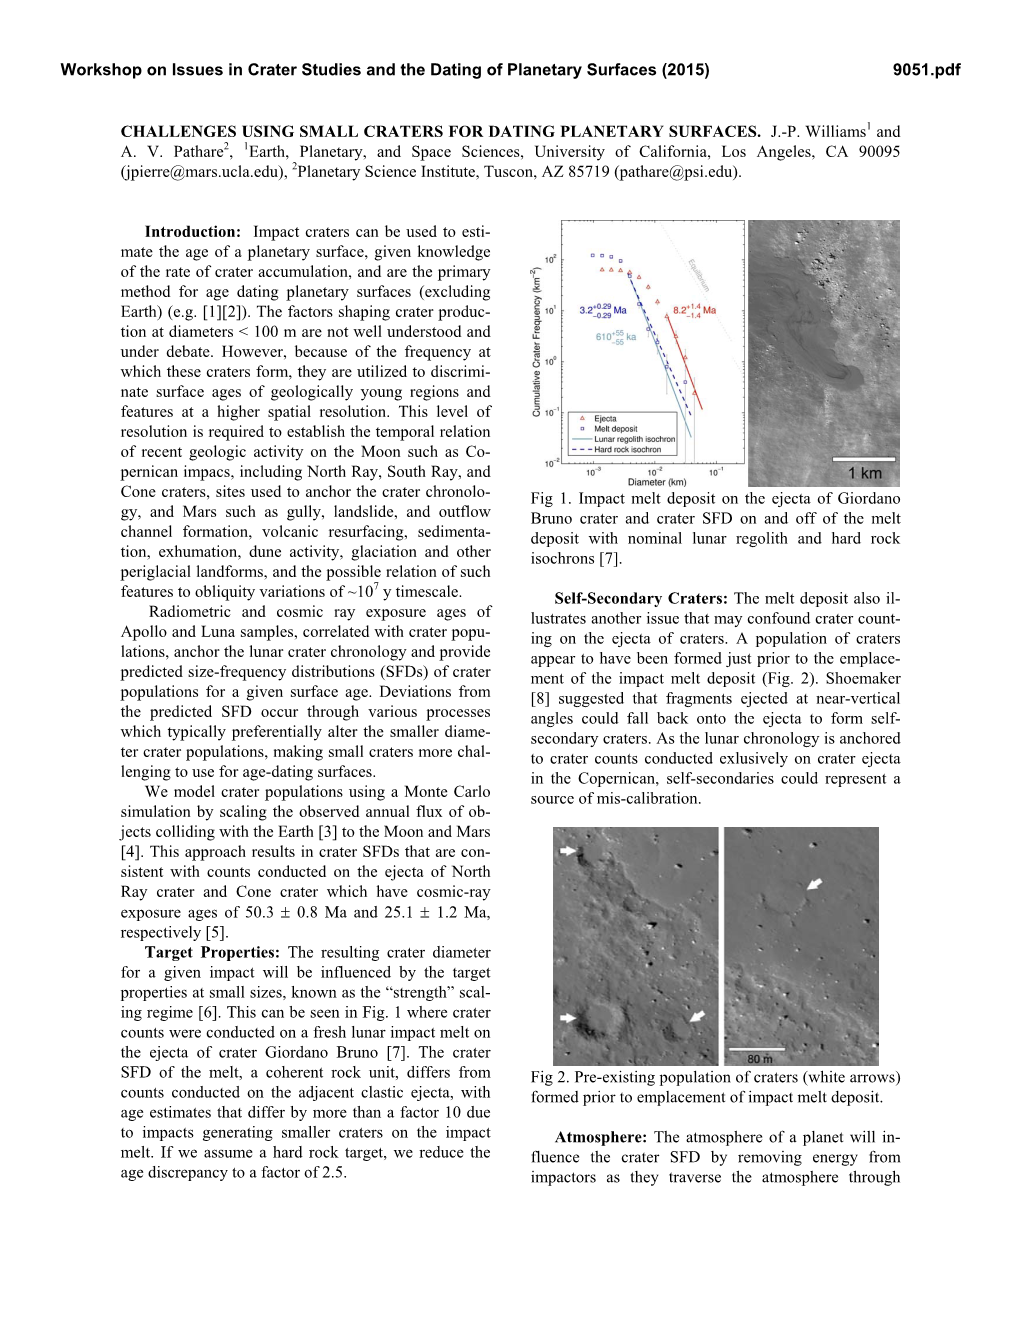 Challenges Using Small Craters for Dating Planetary Surfaces